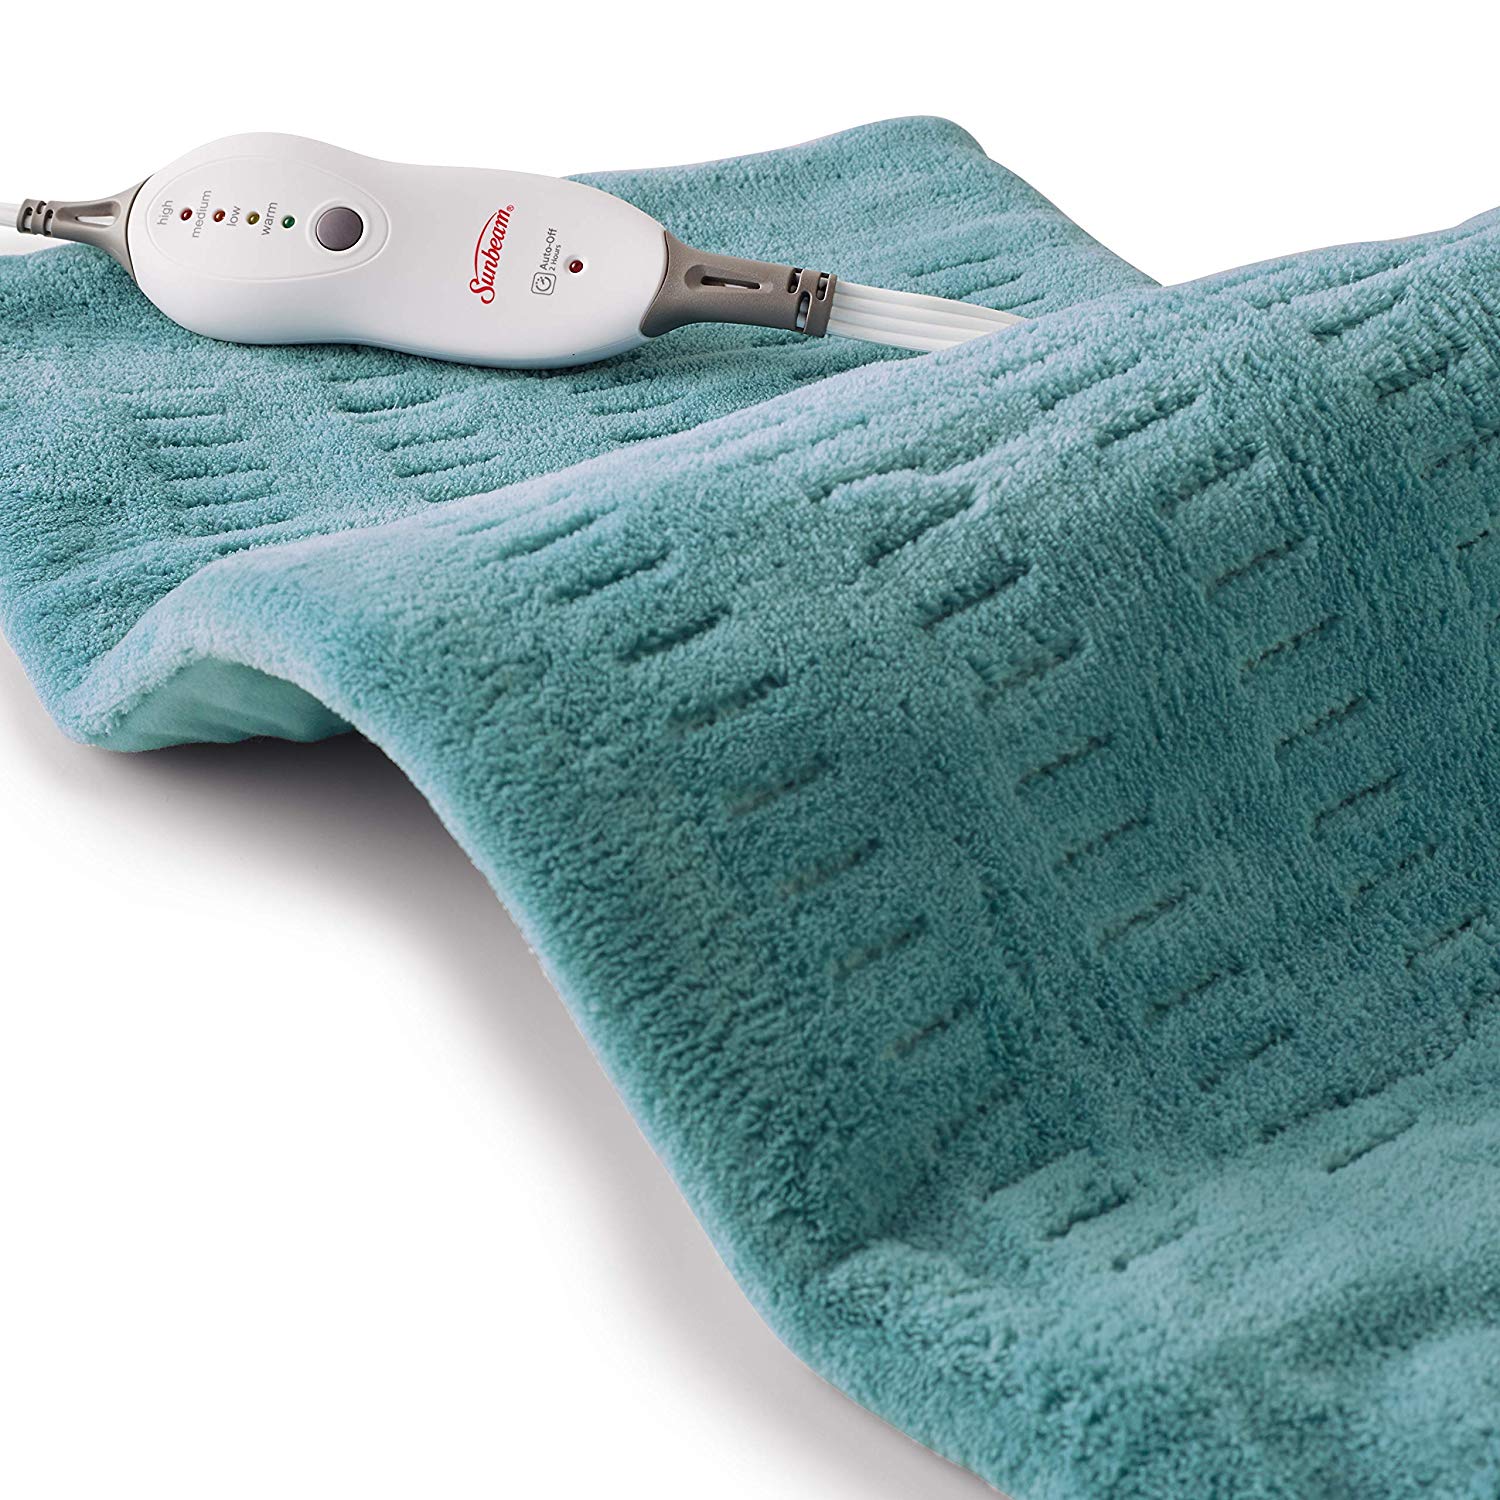 Scoliosis can cause chronic pain, and a heating pad can help you stay more comfortable.